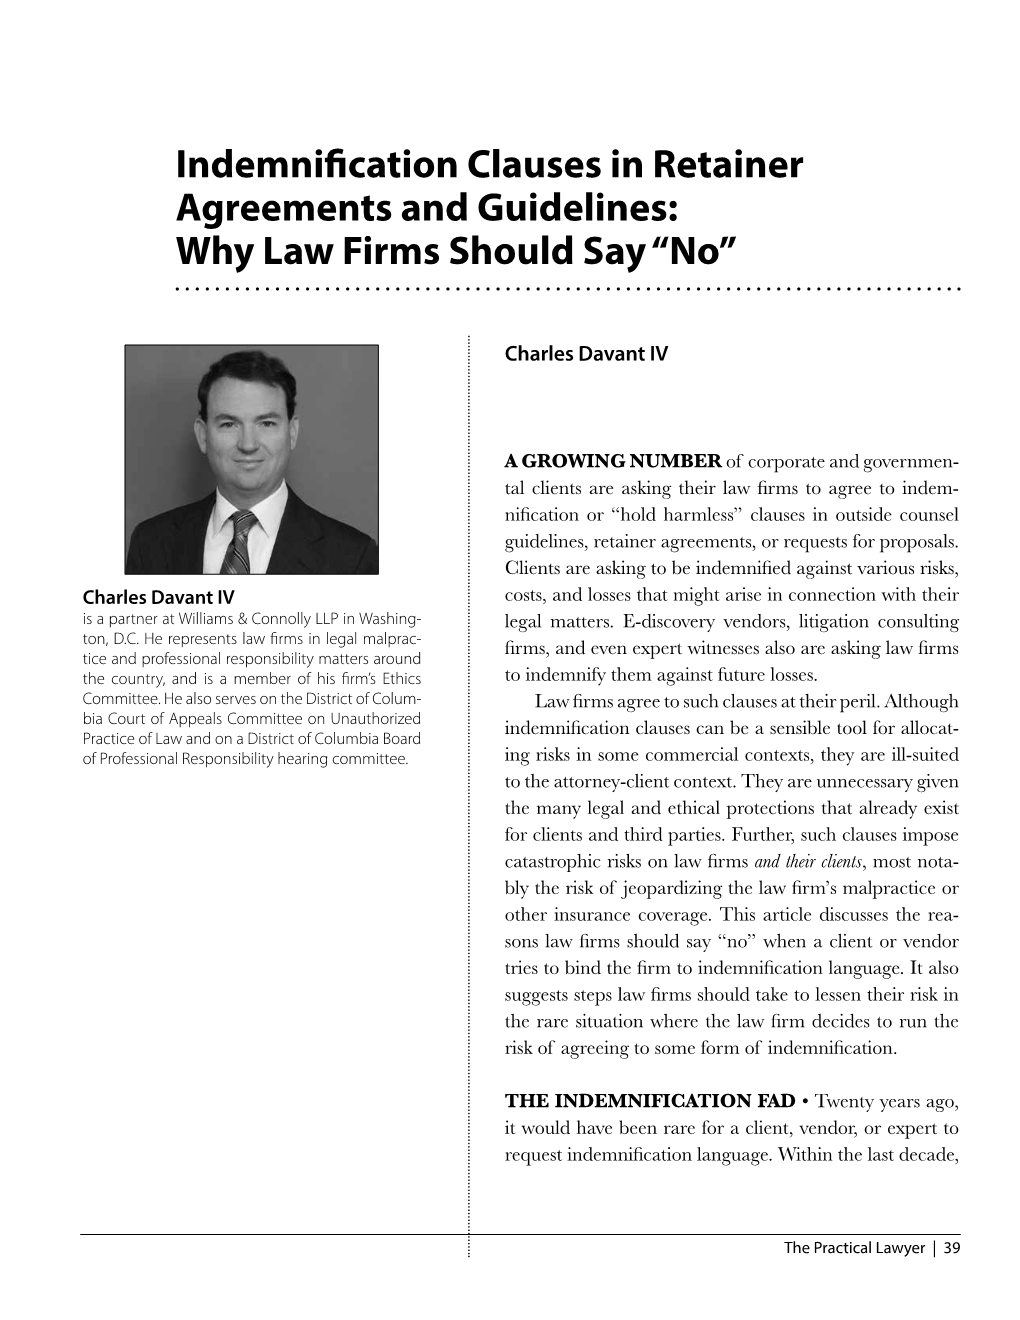 Indemnification Clauses in Retainer Agreements and Guidelines: Why Law Firms Should Say “No”